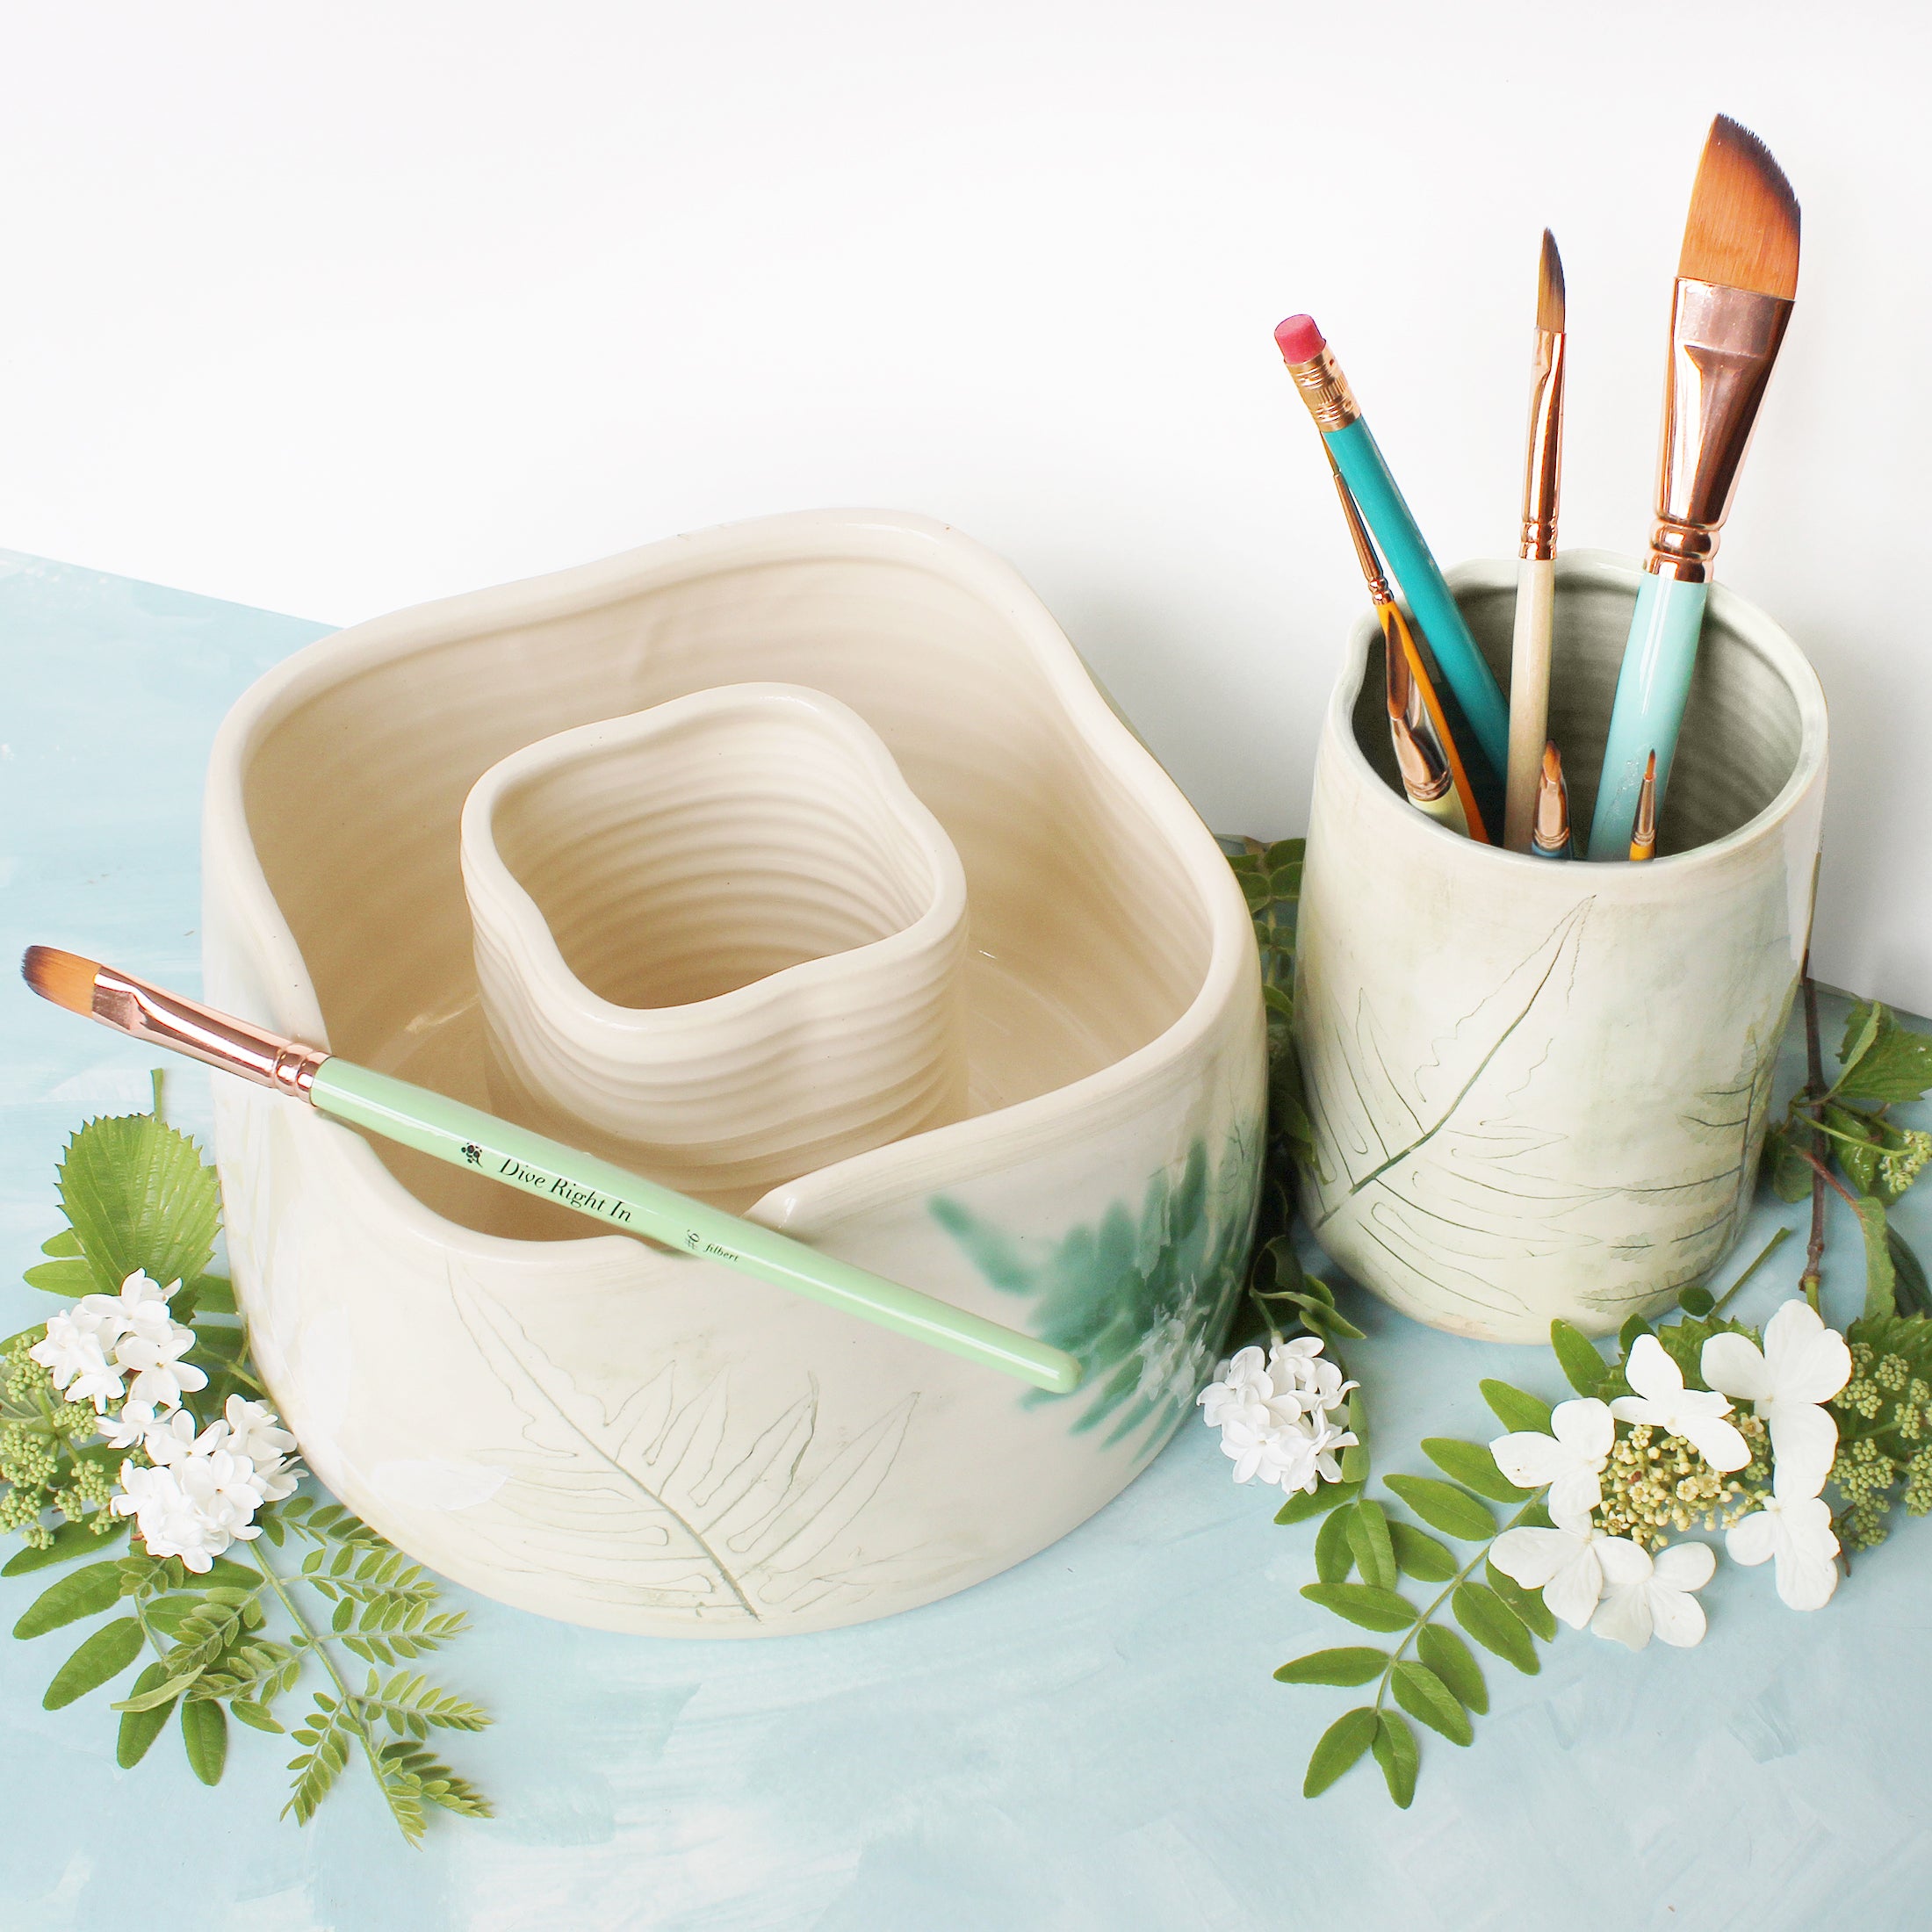 Special Edition Ceramic Brush Holder - Ferns - Unique Shopping for